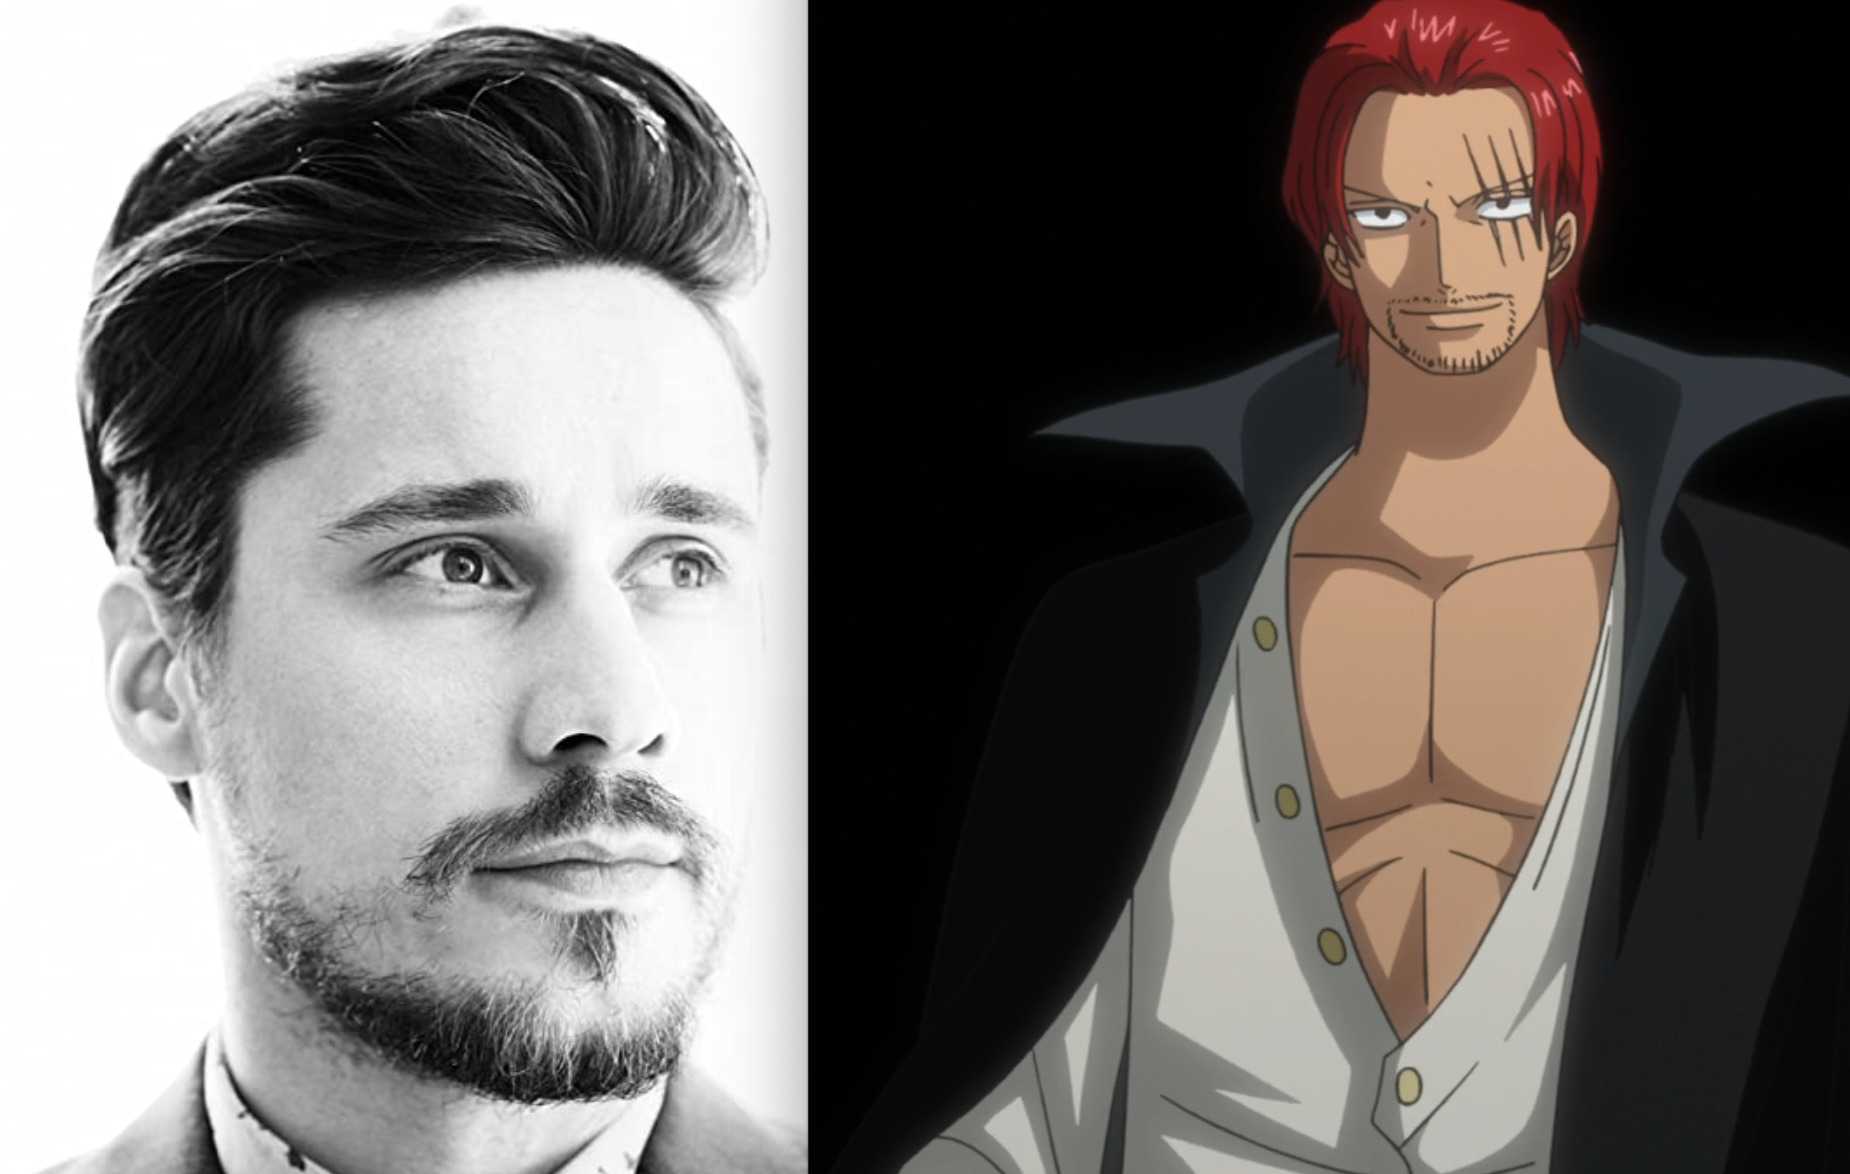 'One Piece' sets sail with Peter Gadiot as Shanks: Meet the star cast of Netflix's live-action series